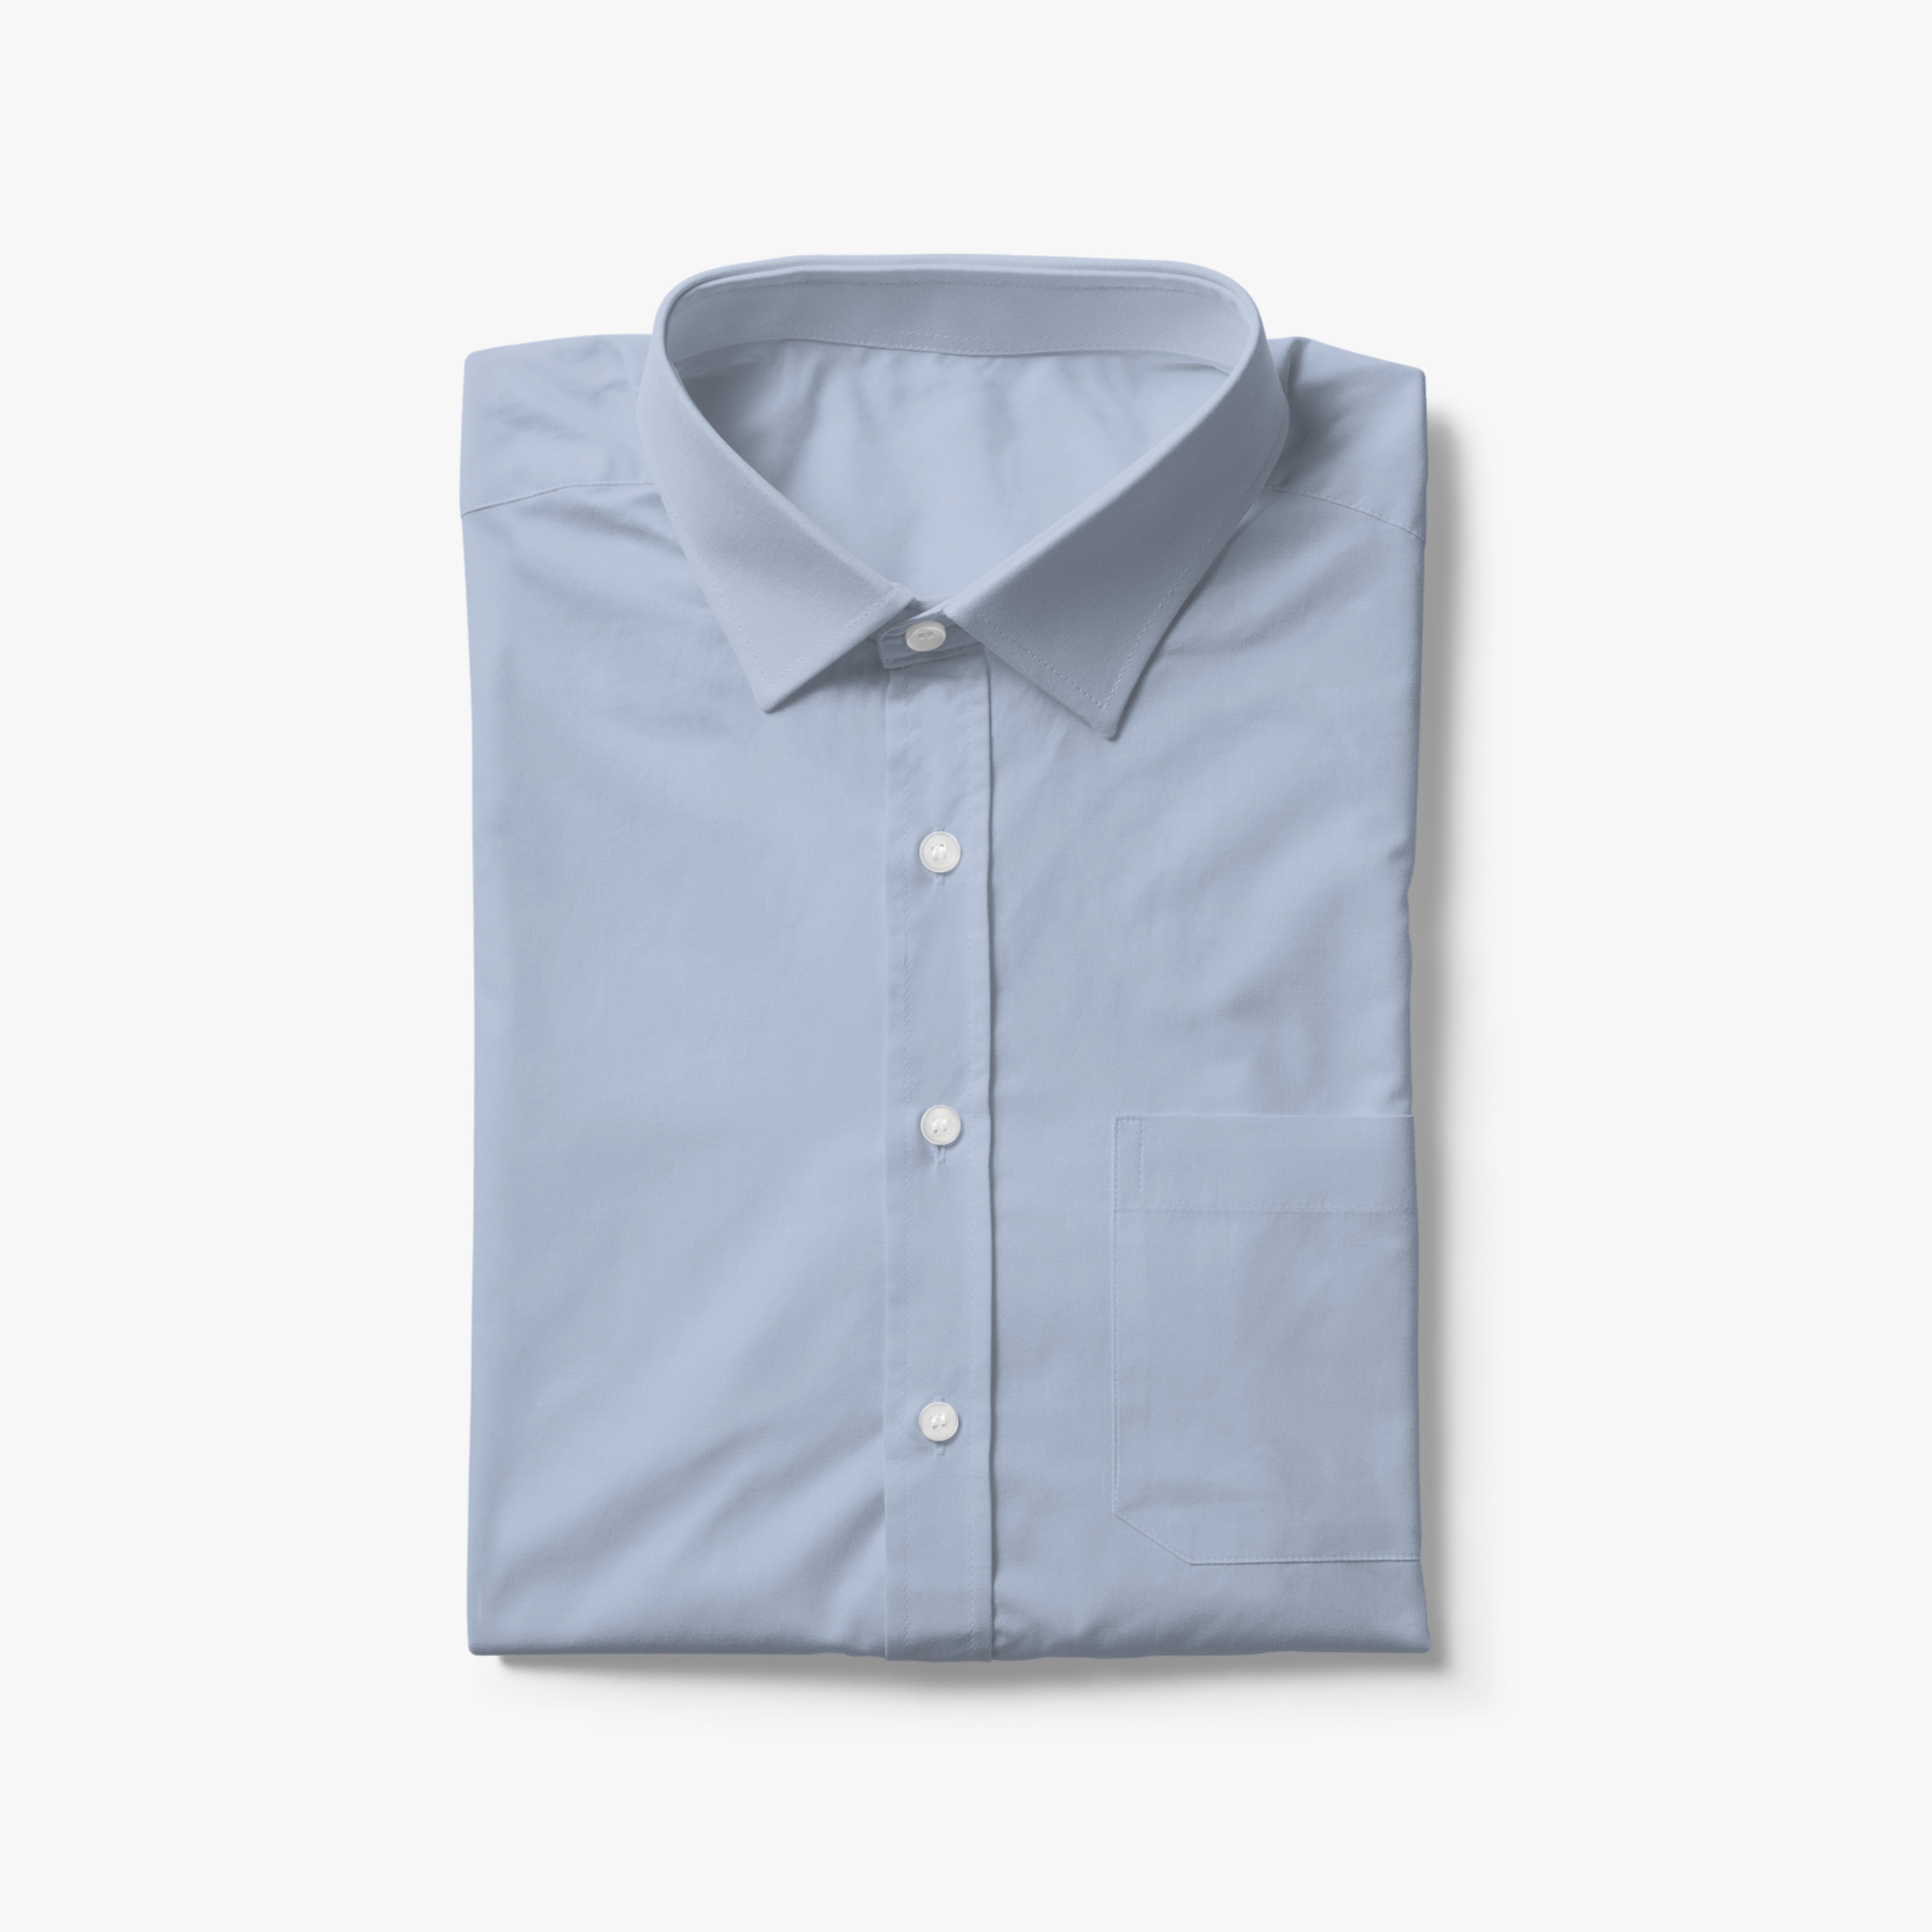 Long Sleeve Shirt - Continue selling when out of stock